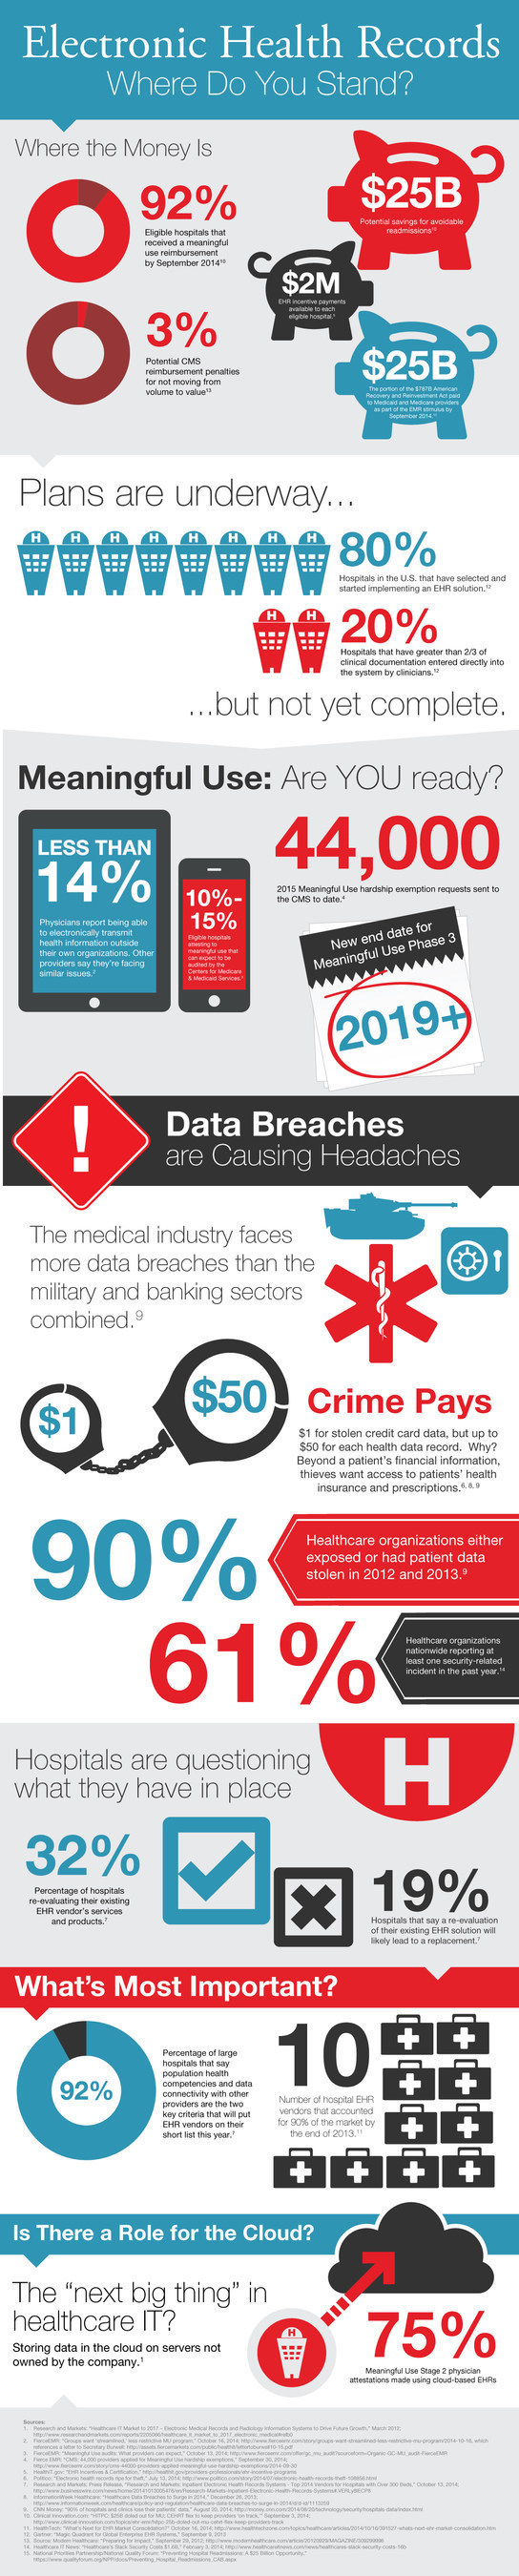 Logicalis US Healthcare IT Infographic